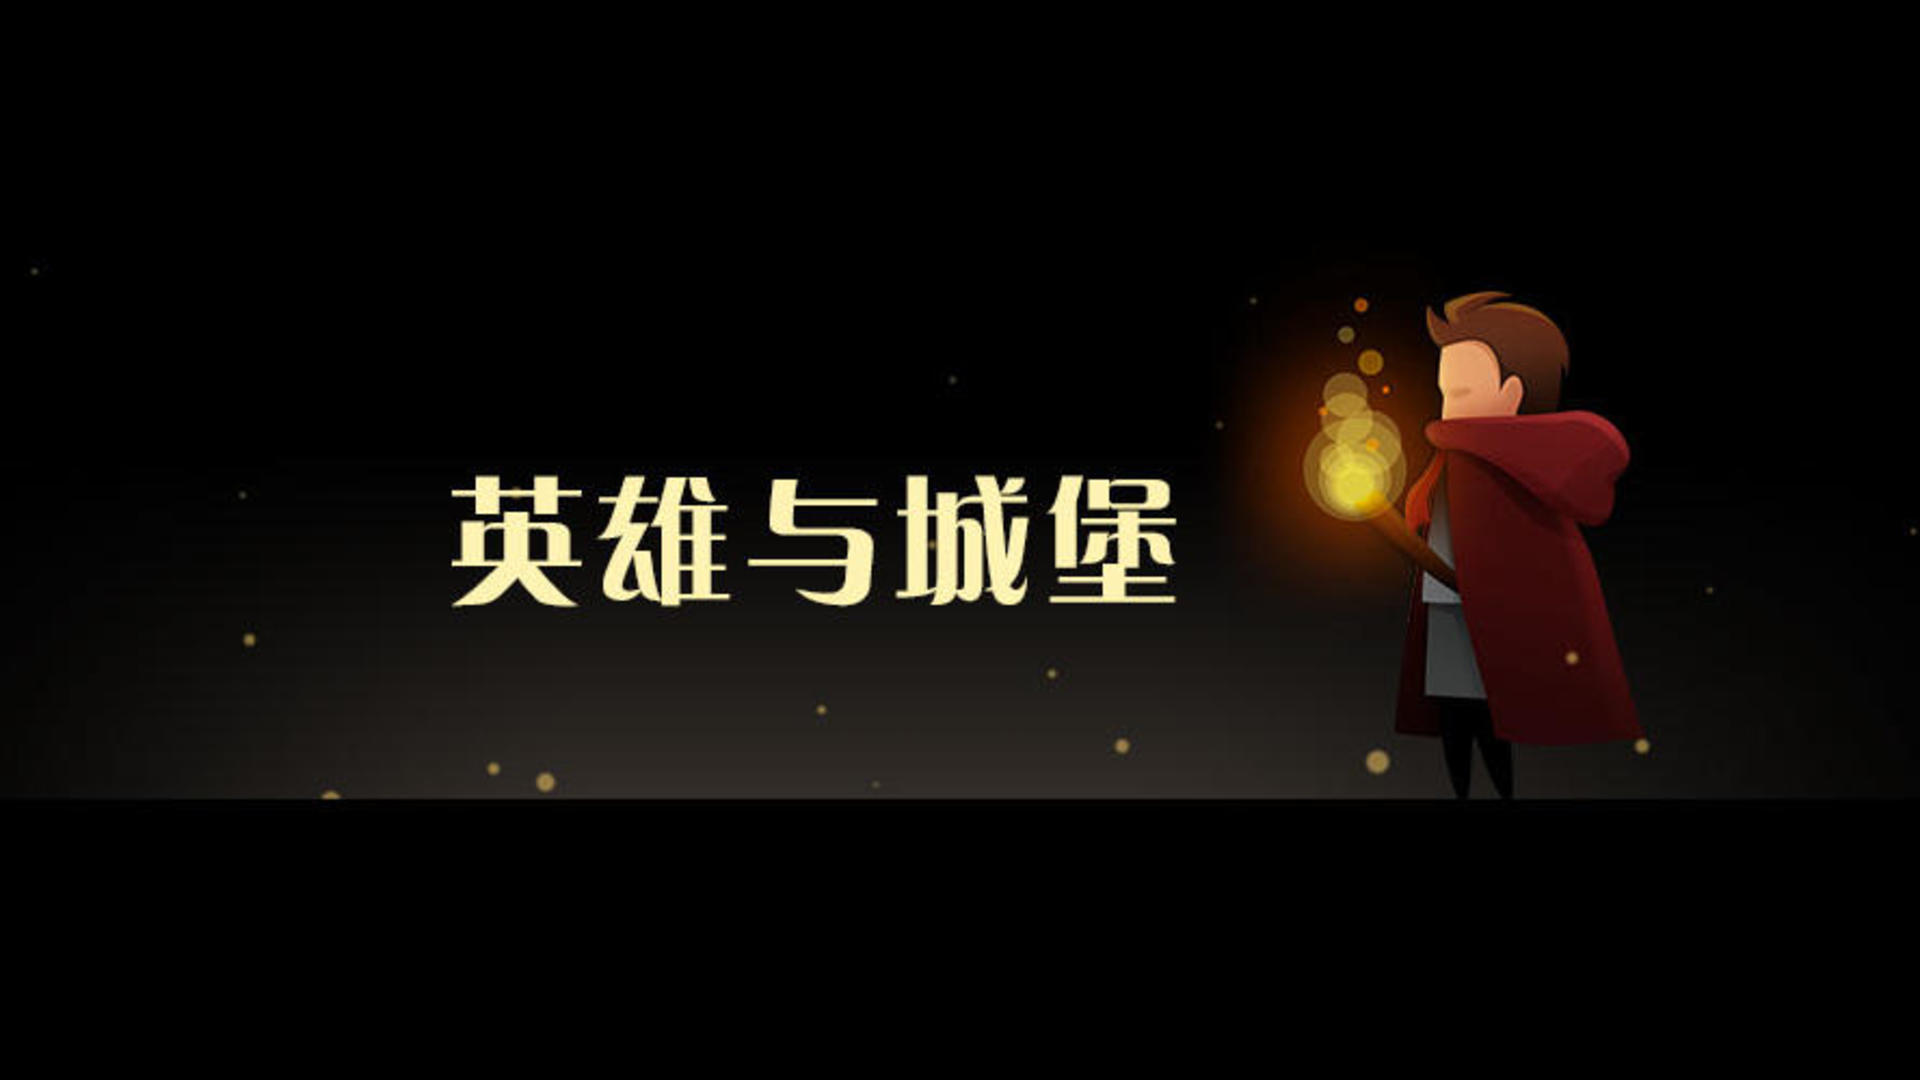 Banner of 英雄與城堡 